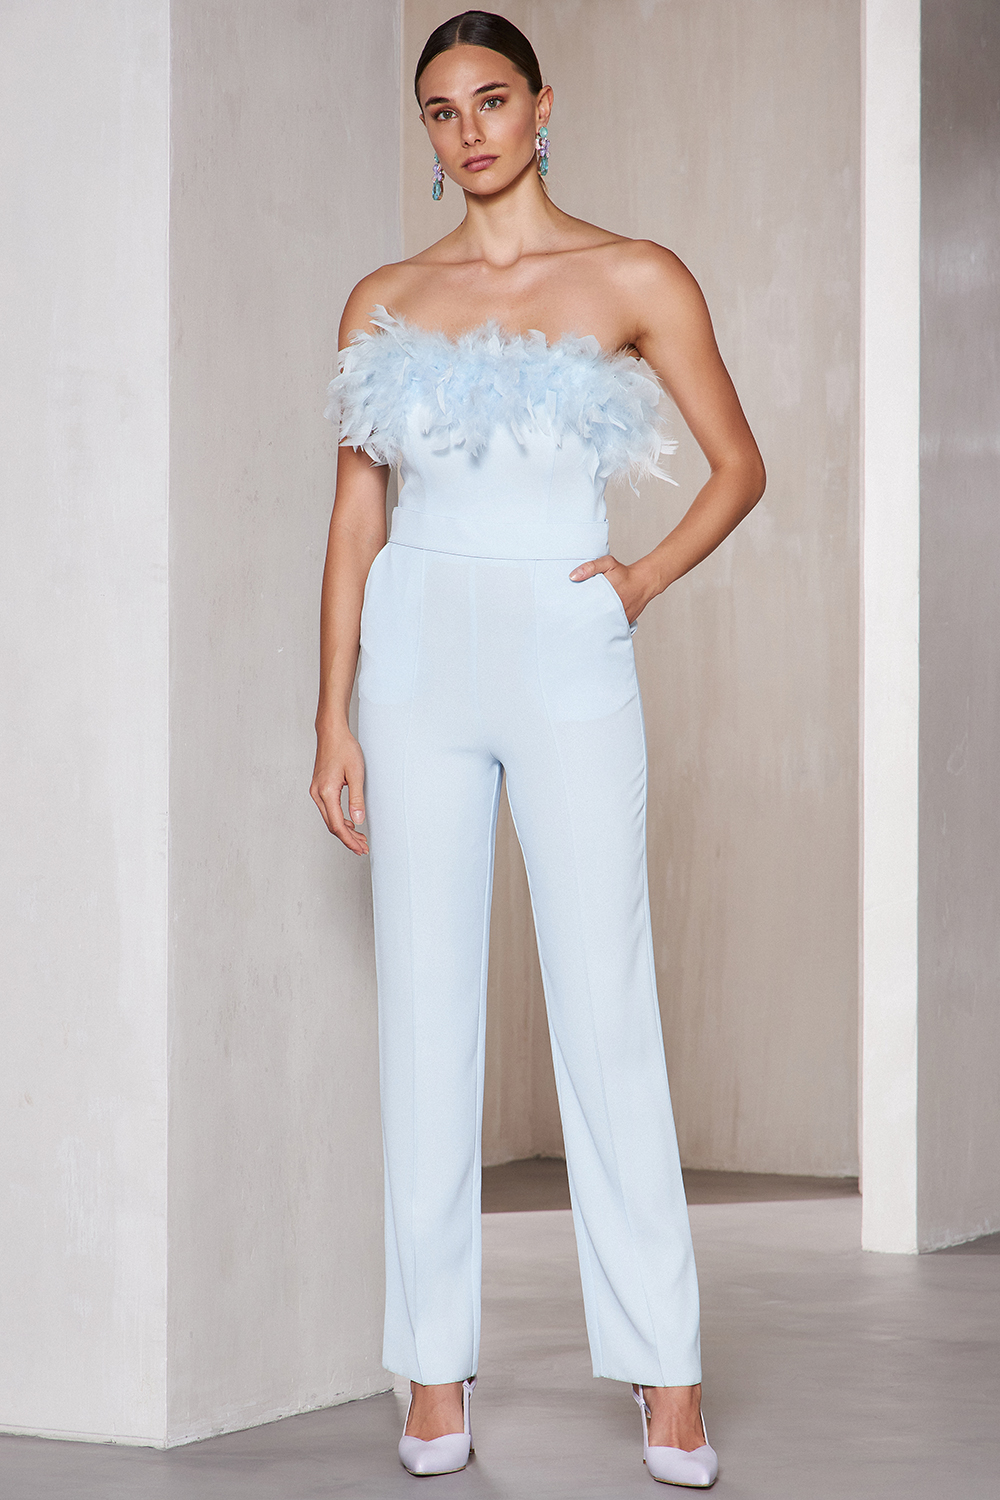 Cocktail strapless jumpsuit with feathers at the top